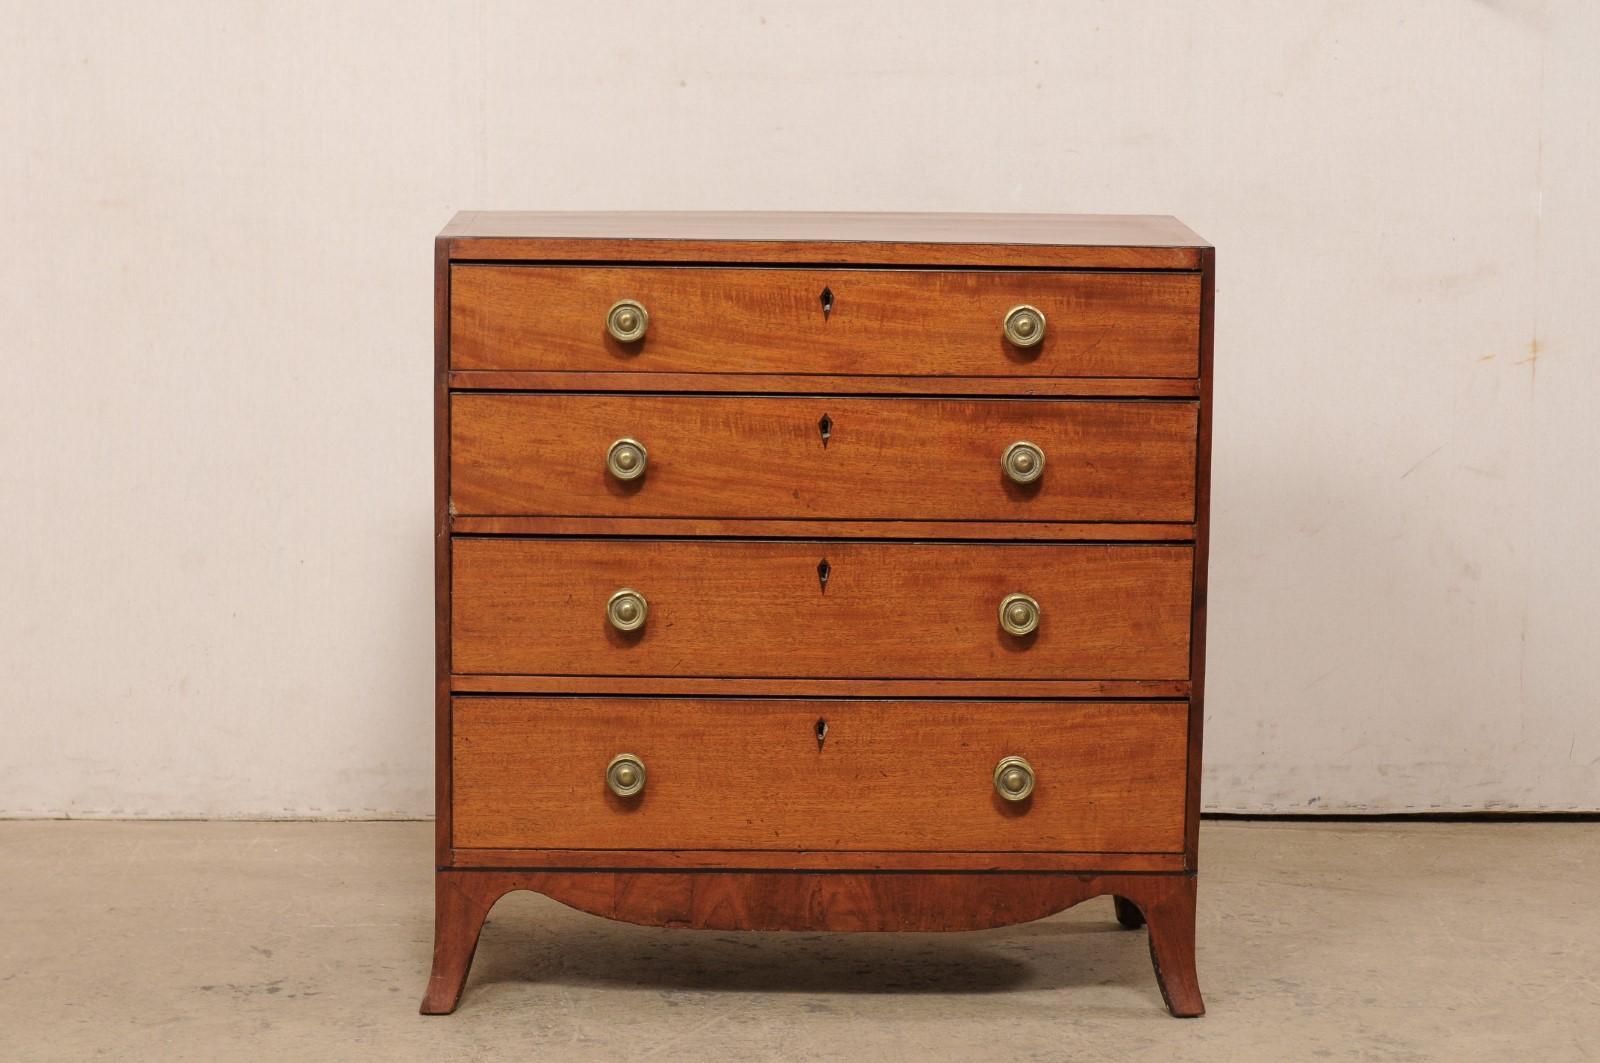 English Wooden Chest of 4 Drawers, Early to Mid 19th Century For Sale 8